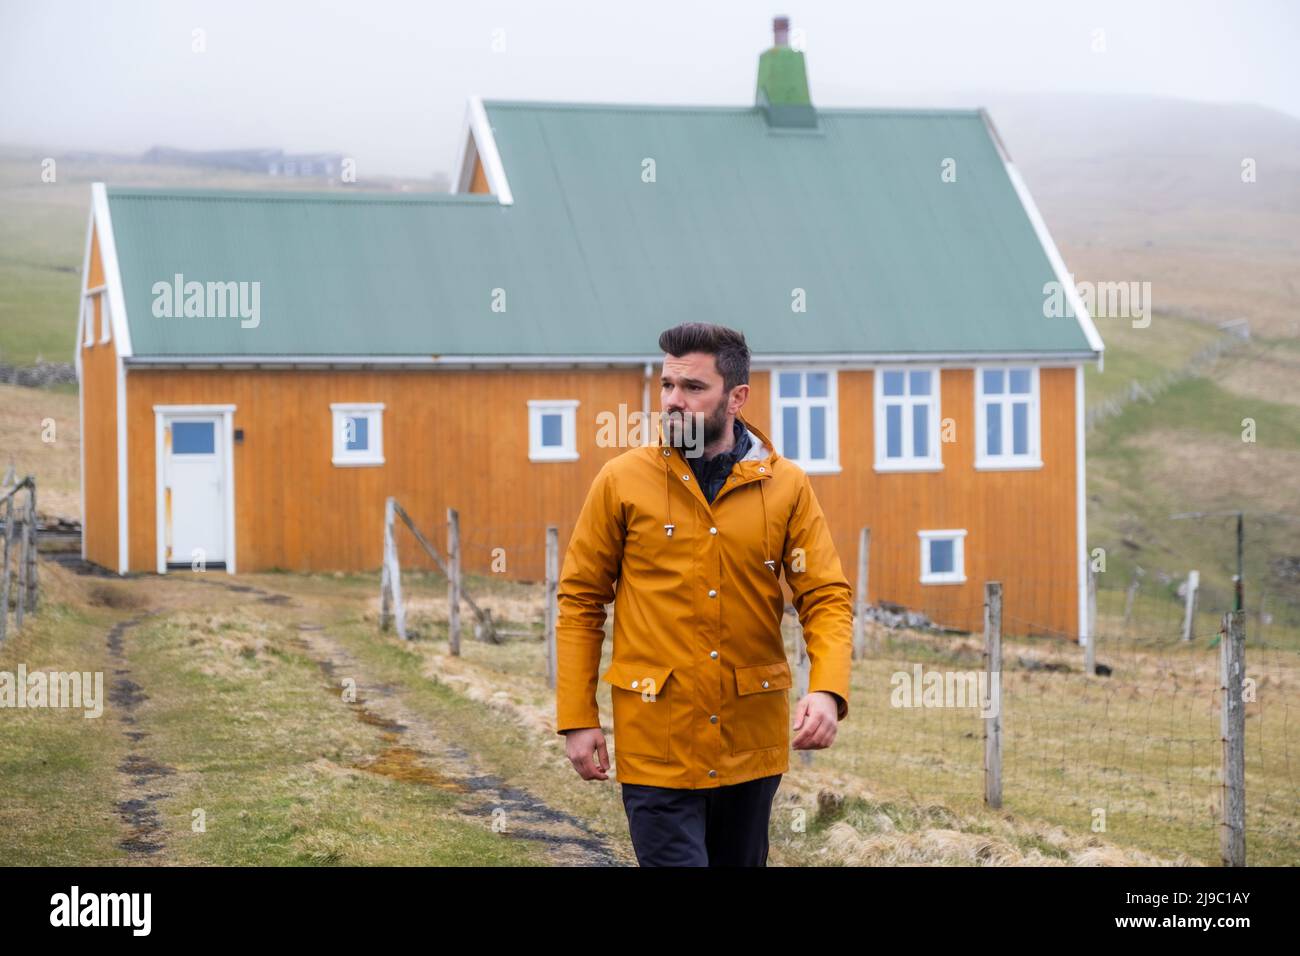 This delightful cottage and the man's matching raincoat stand out against the white-grey sky and sea. Stock Photo